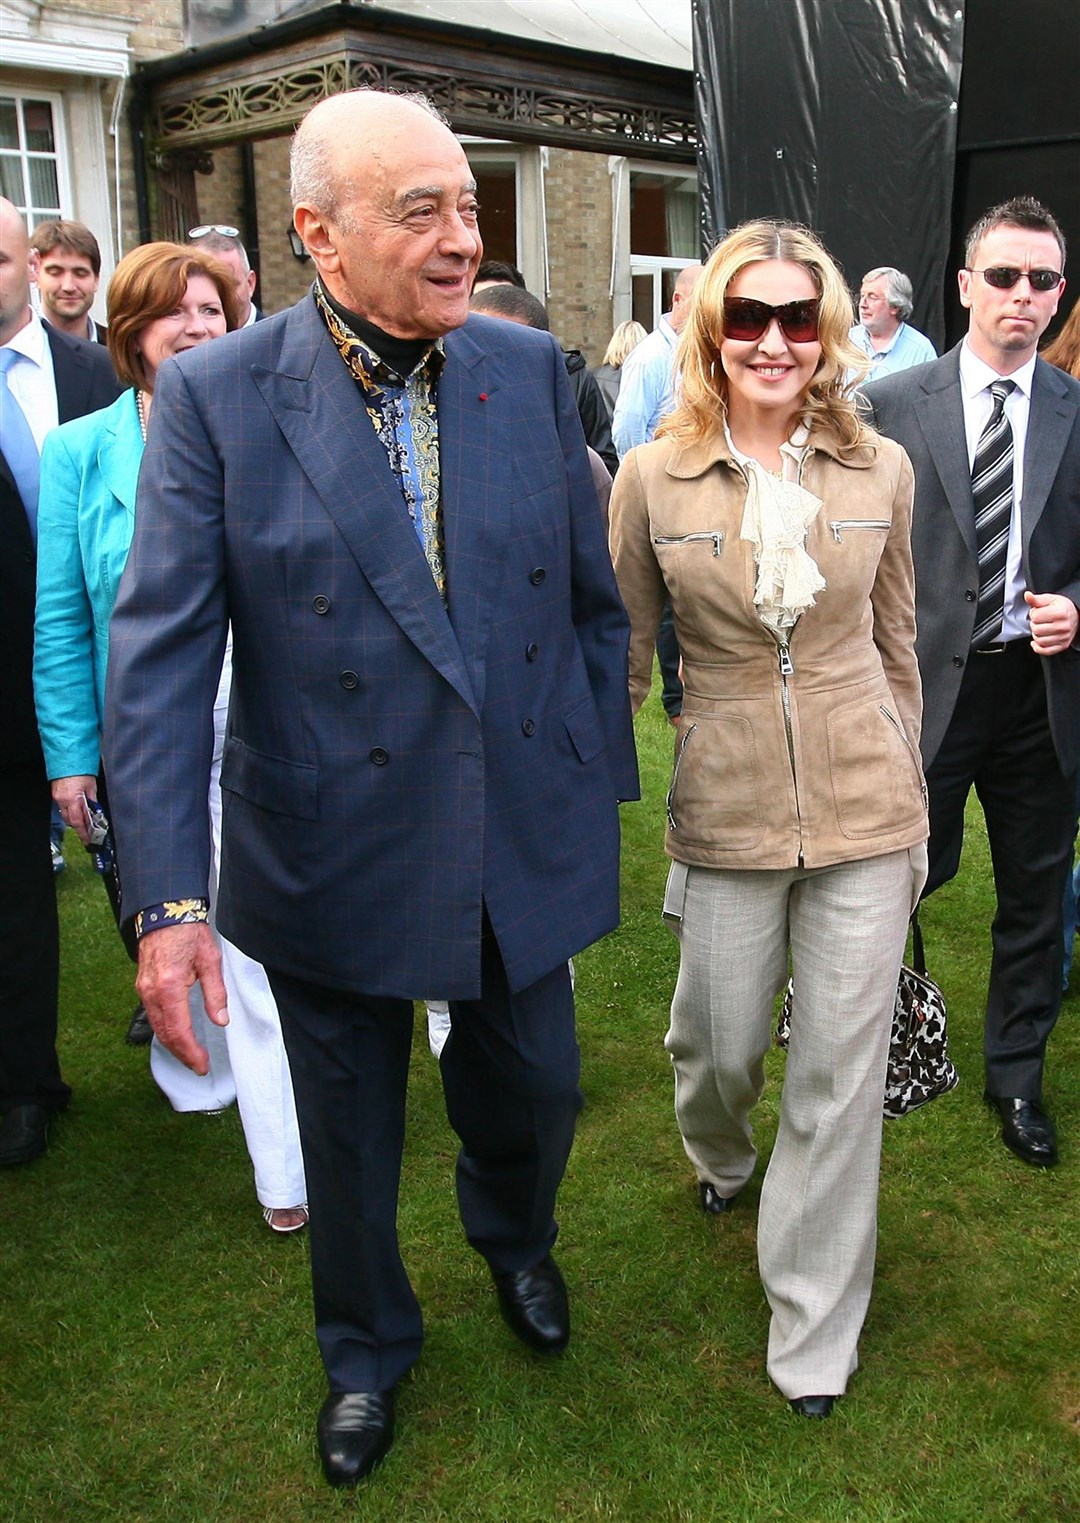 Mohamed Al Fayed with Madonna as she arrives at The New School in West Heath, Kent, for a fundraiser in 2010 (PA)